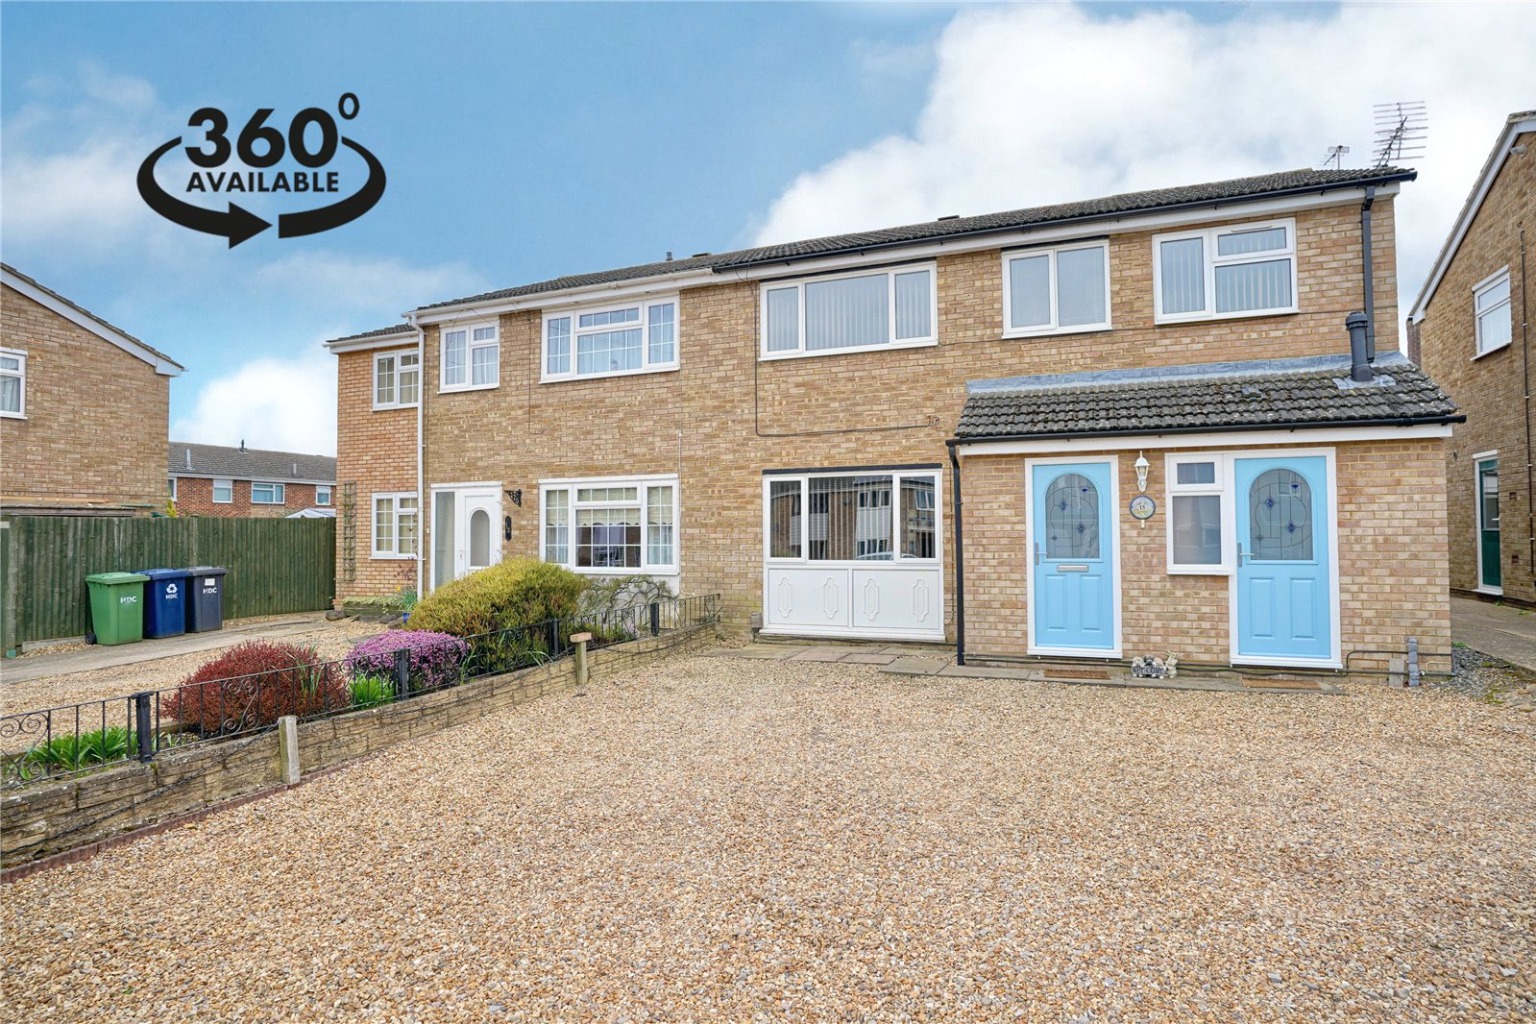 4 bed semi-detached house for sale in Kenilworth Close, St. Neots - Property Image 1